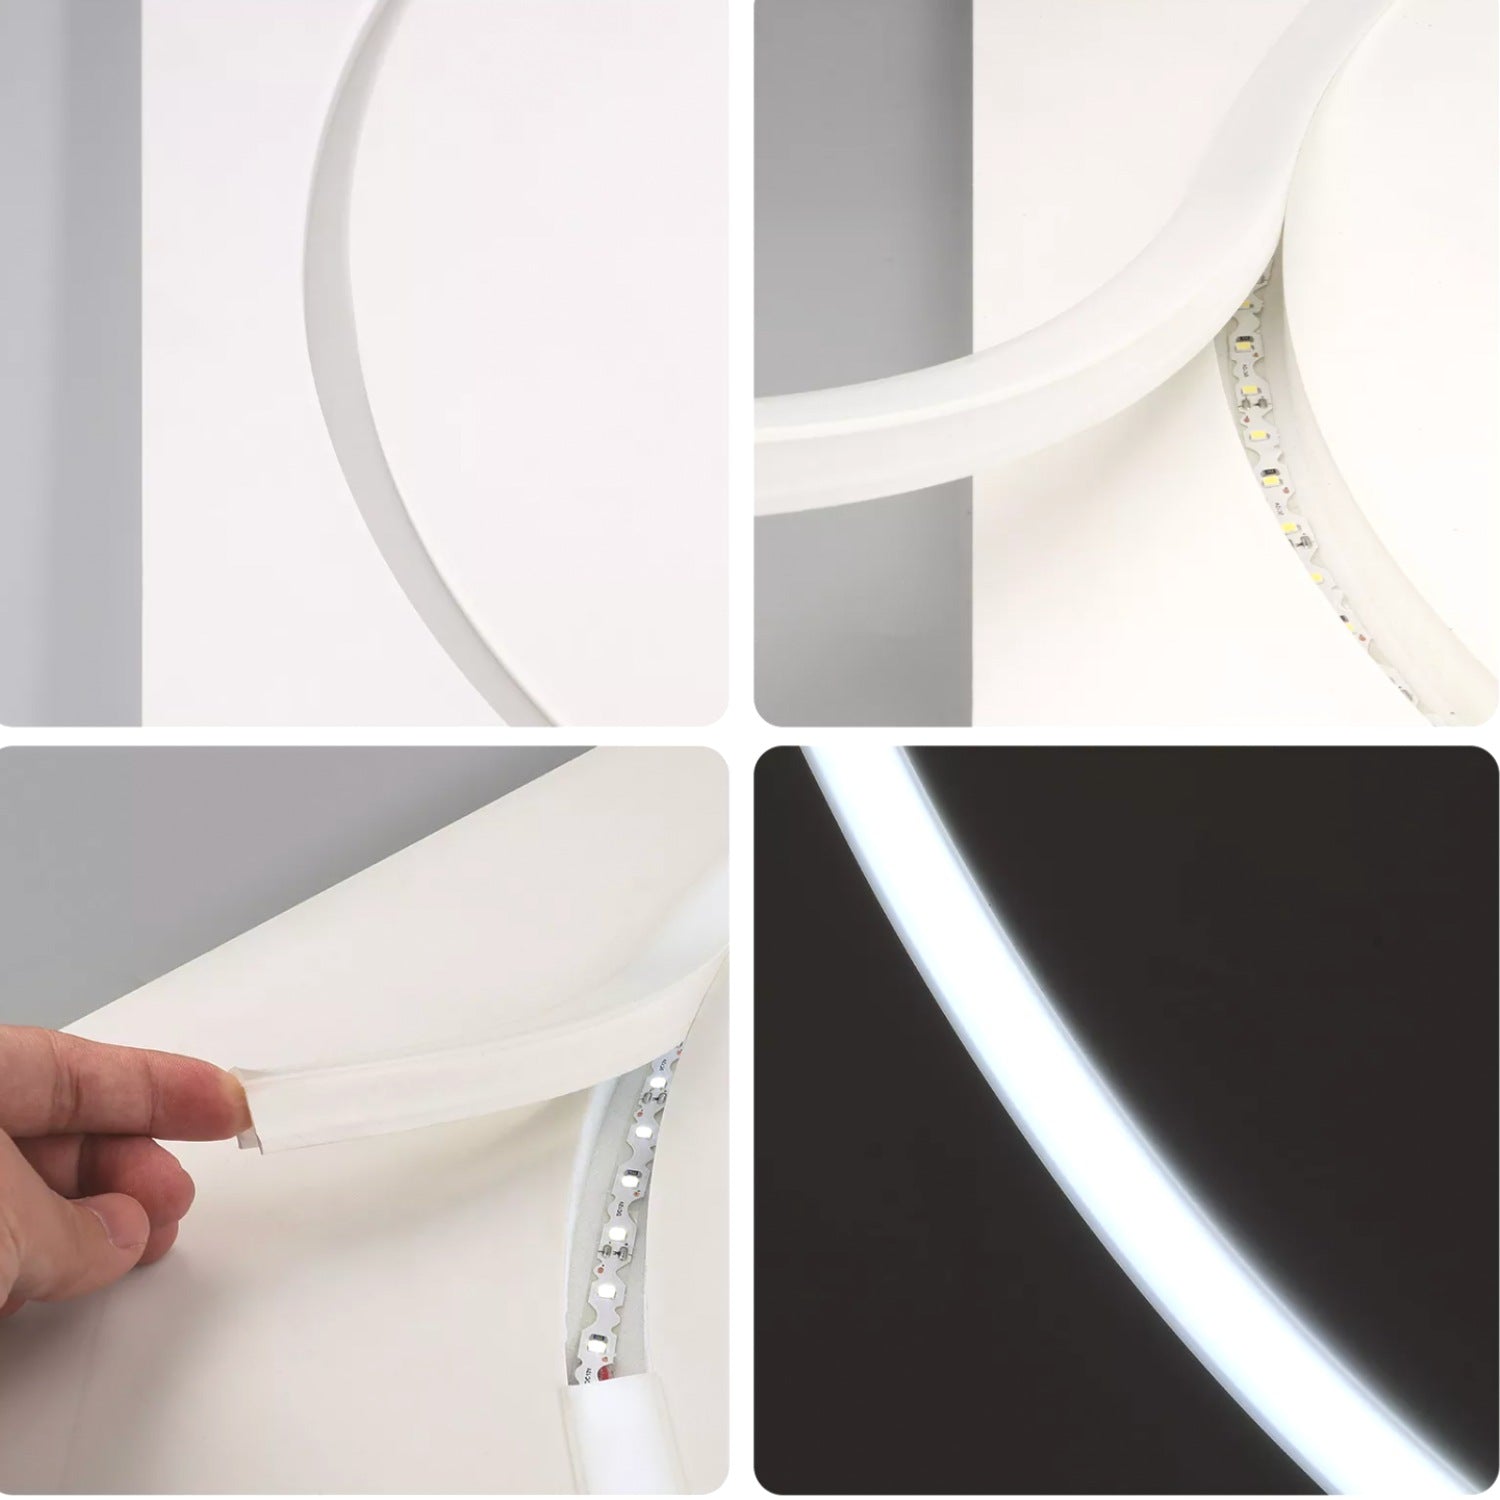 LED Neon Flex & LED Strip Silicone Cover Body Flexible Bendable 20x10mm - ATOM LED